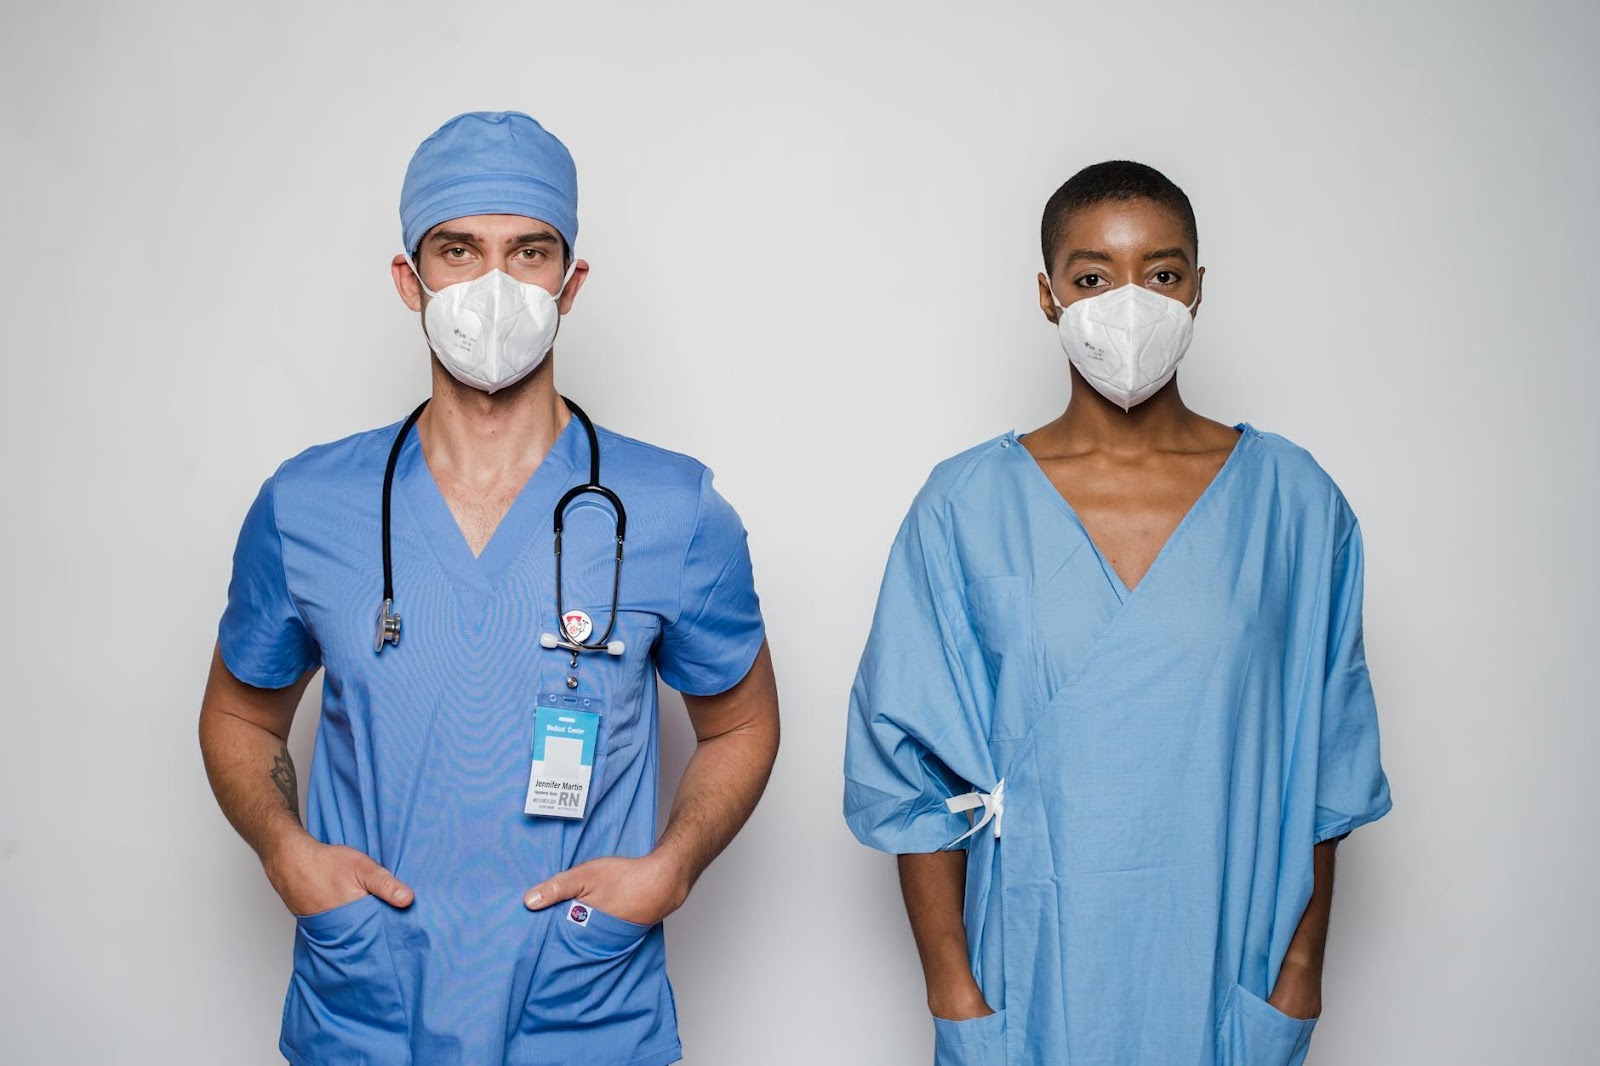 Multiracial doctor and patient in uniform and masks